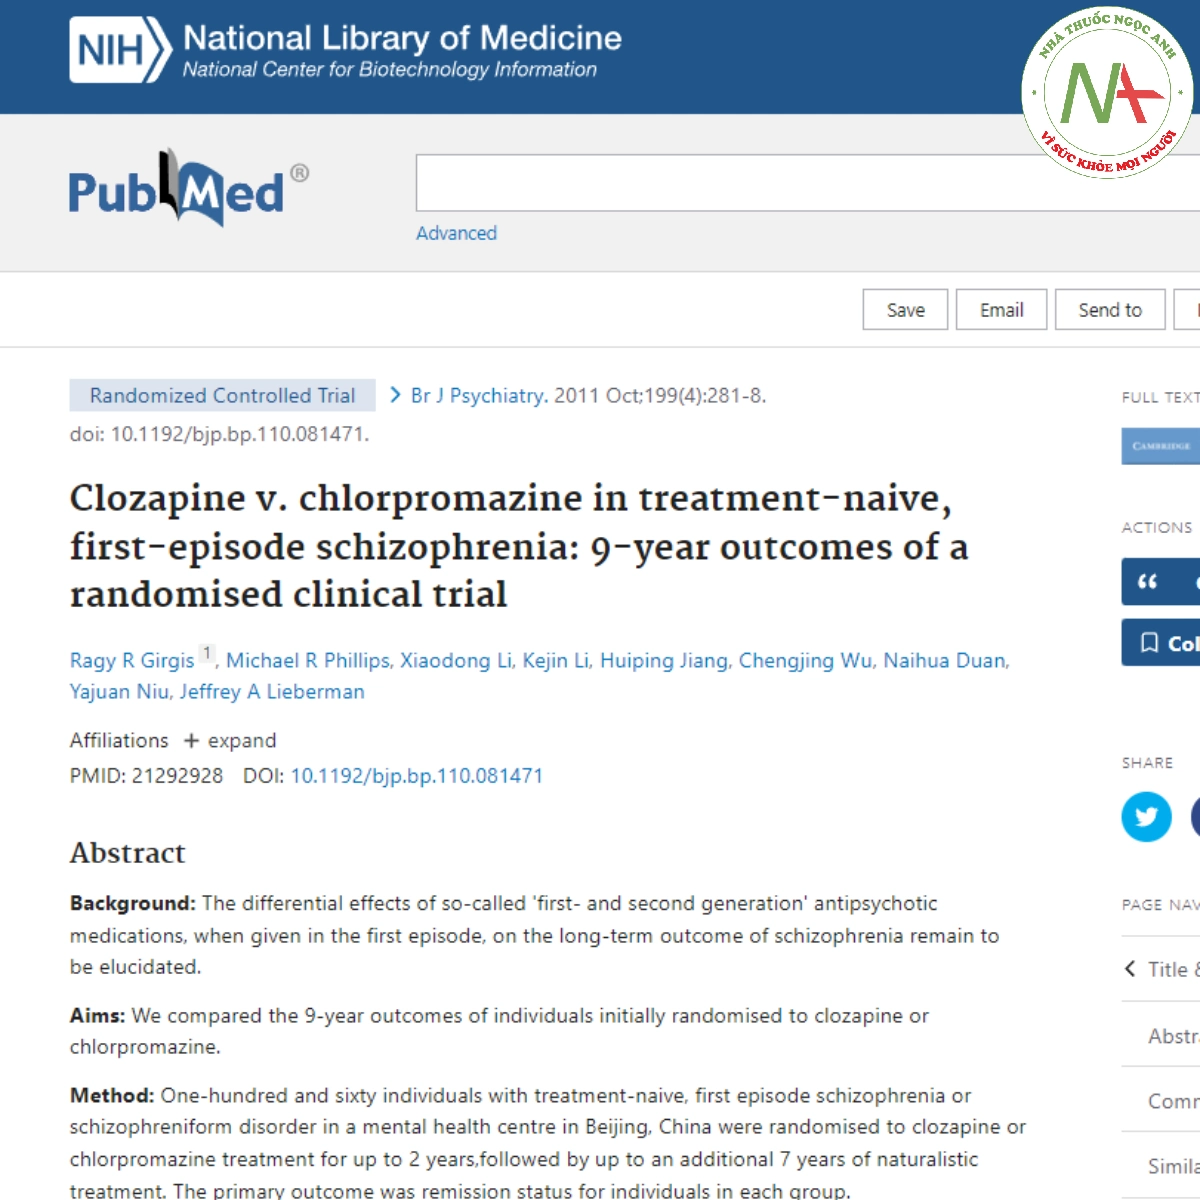 Clozapine v. chlorpromazine in treatment-naive, first-episode schizophrenia: 9-year outcomes of a randomised clinical trial